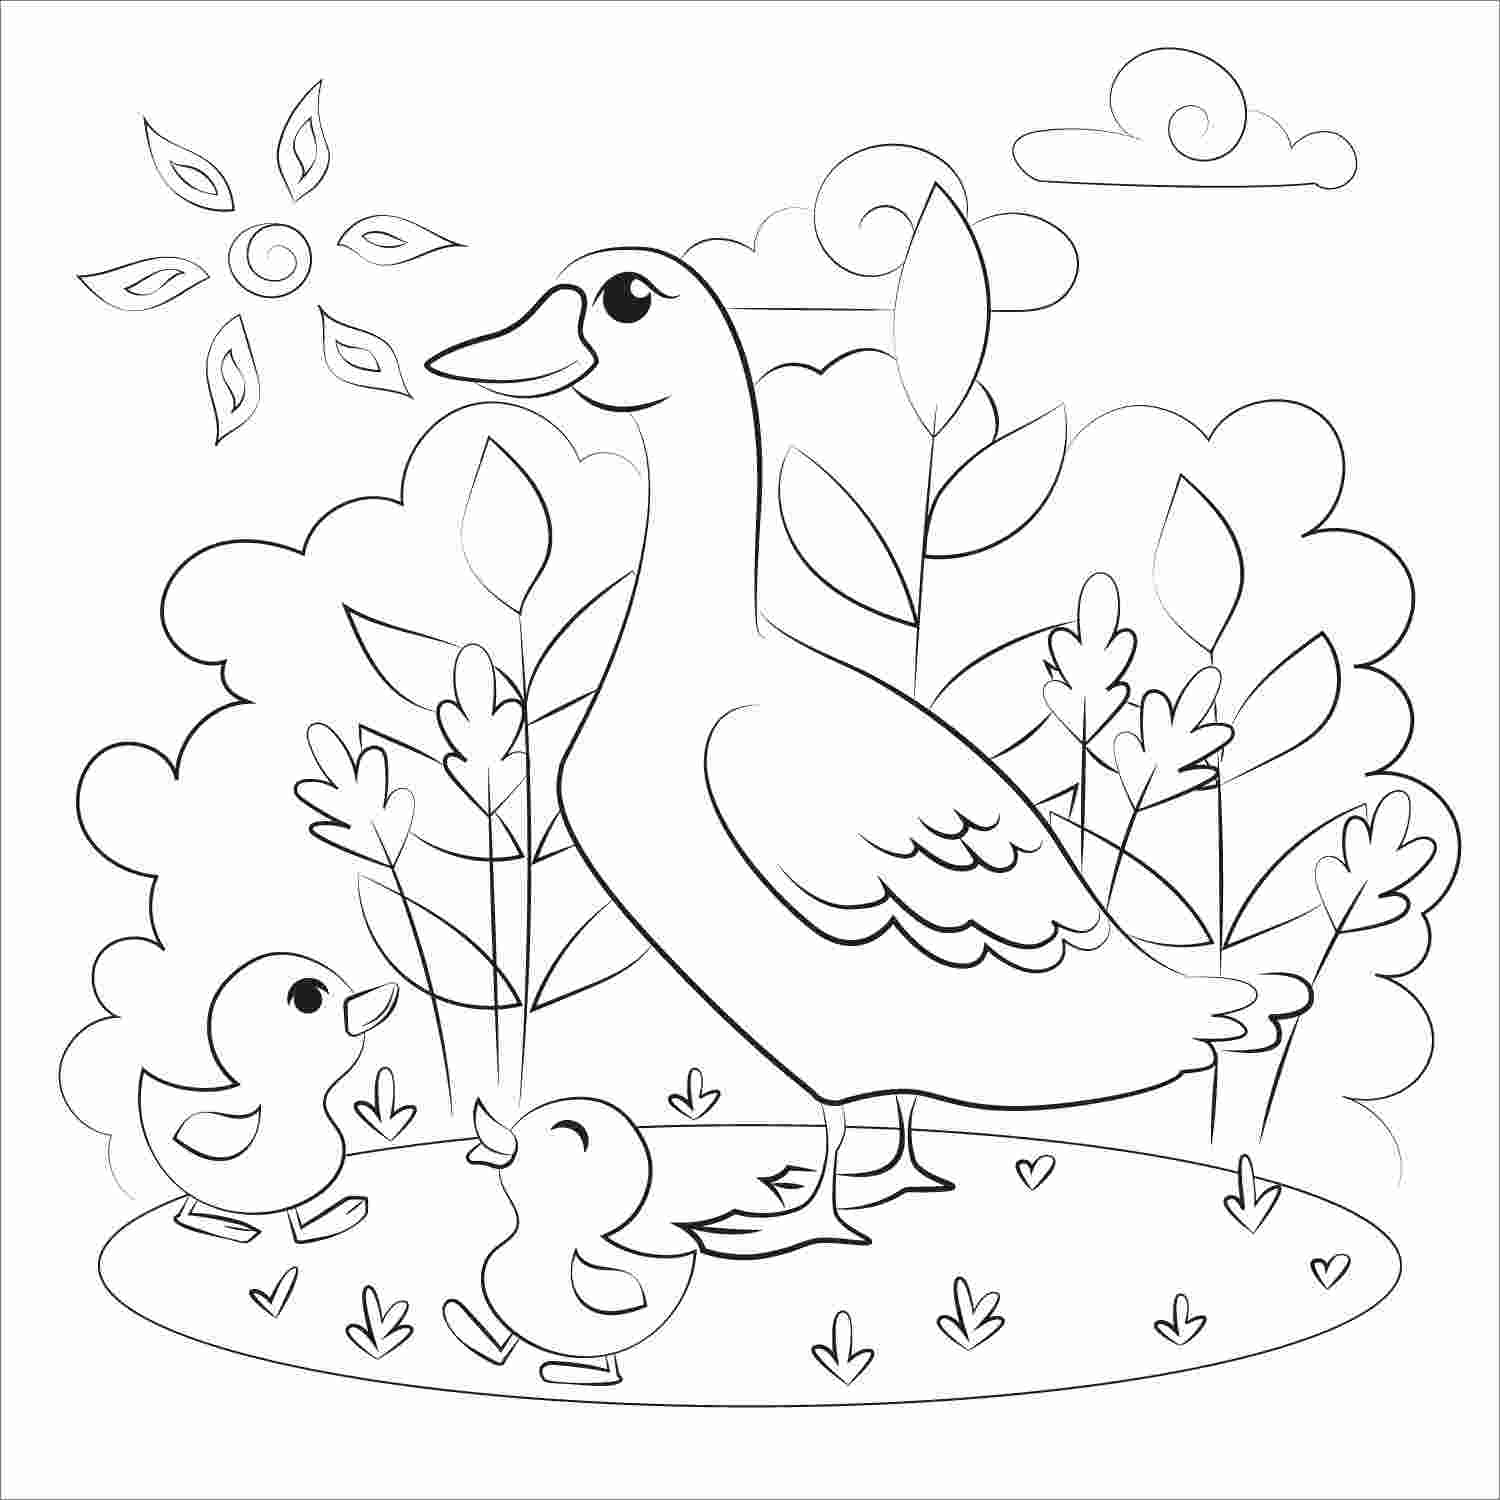 Mother duck and baby ducklings go around on the sunny day Coloring Page